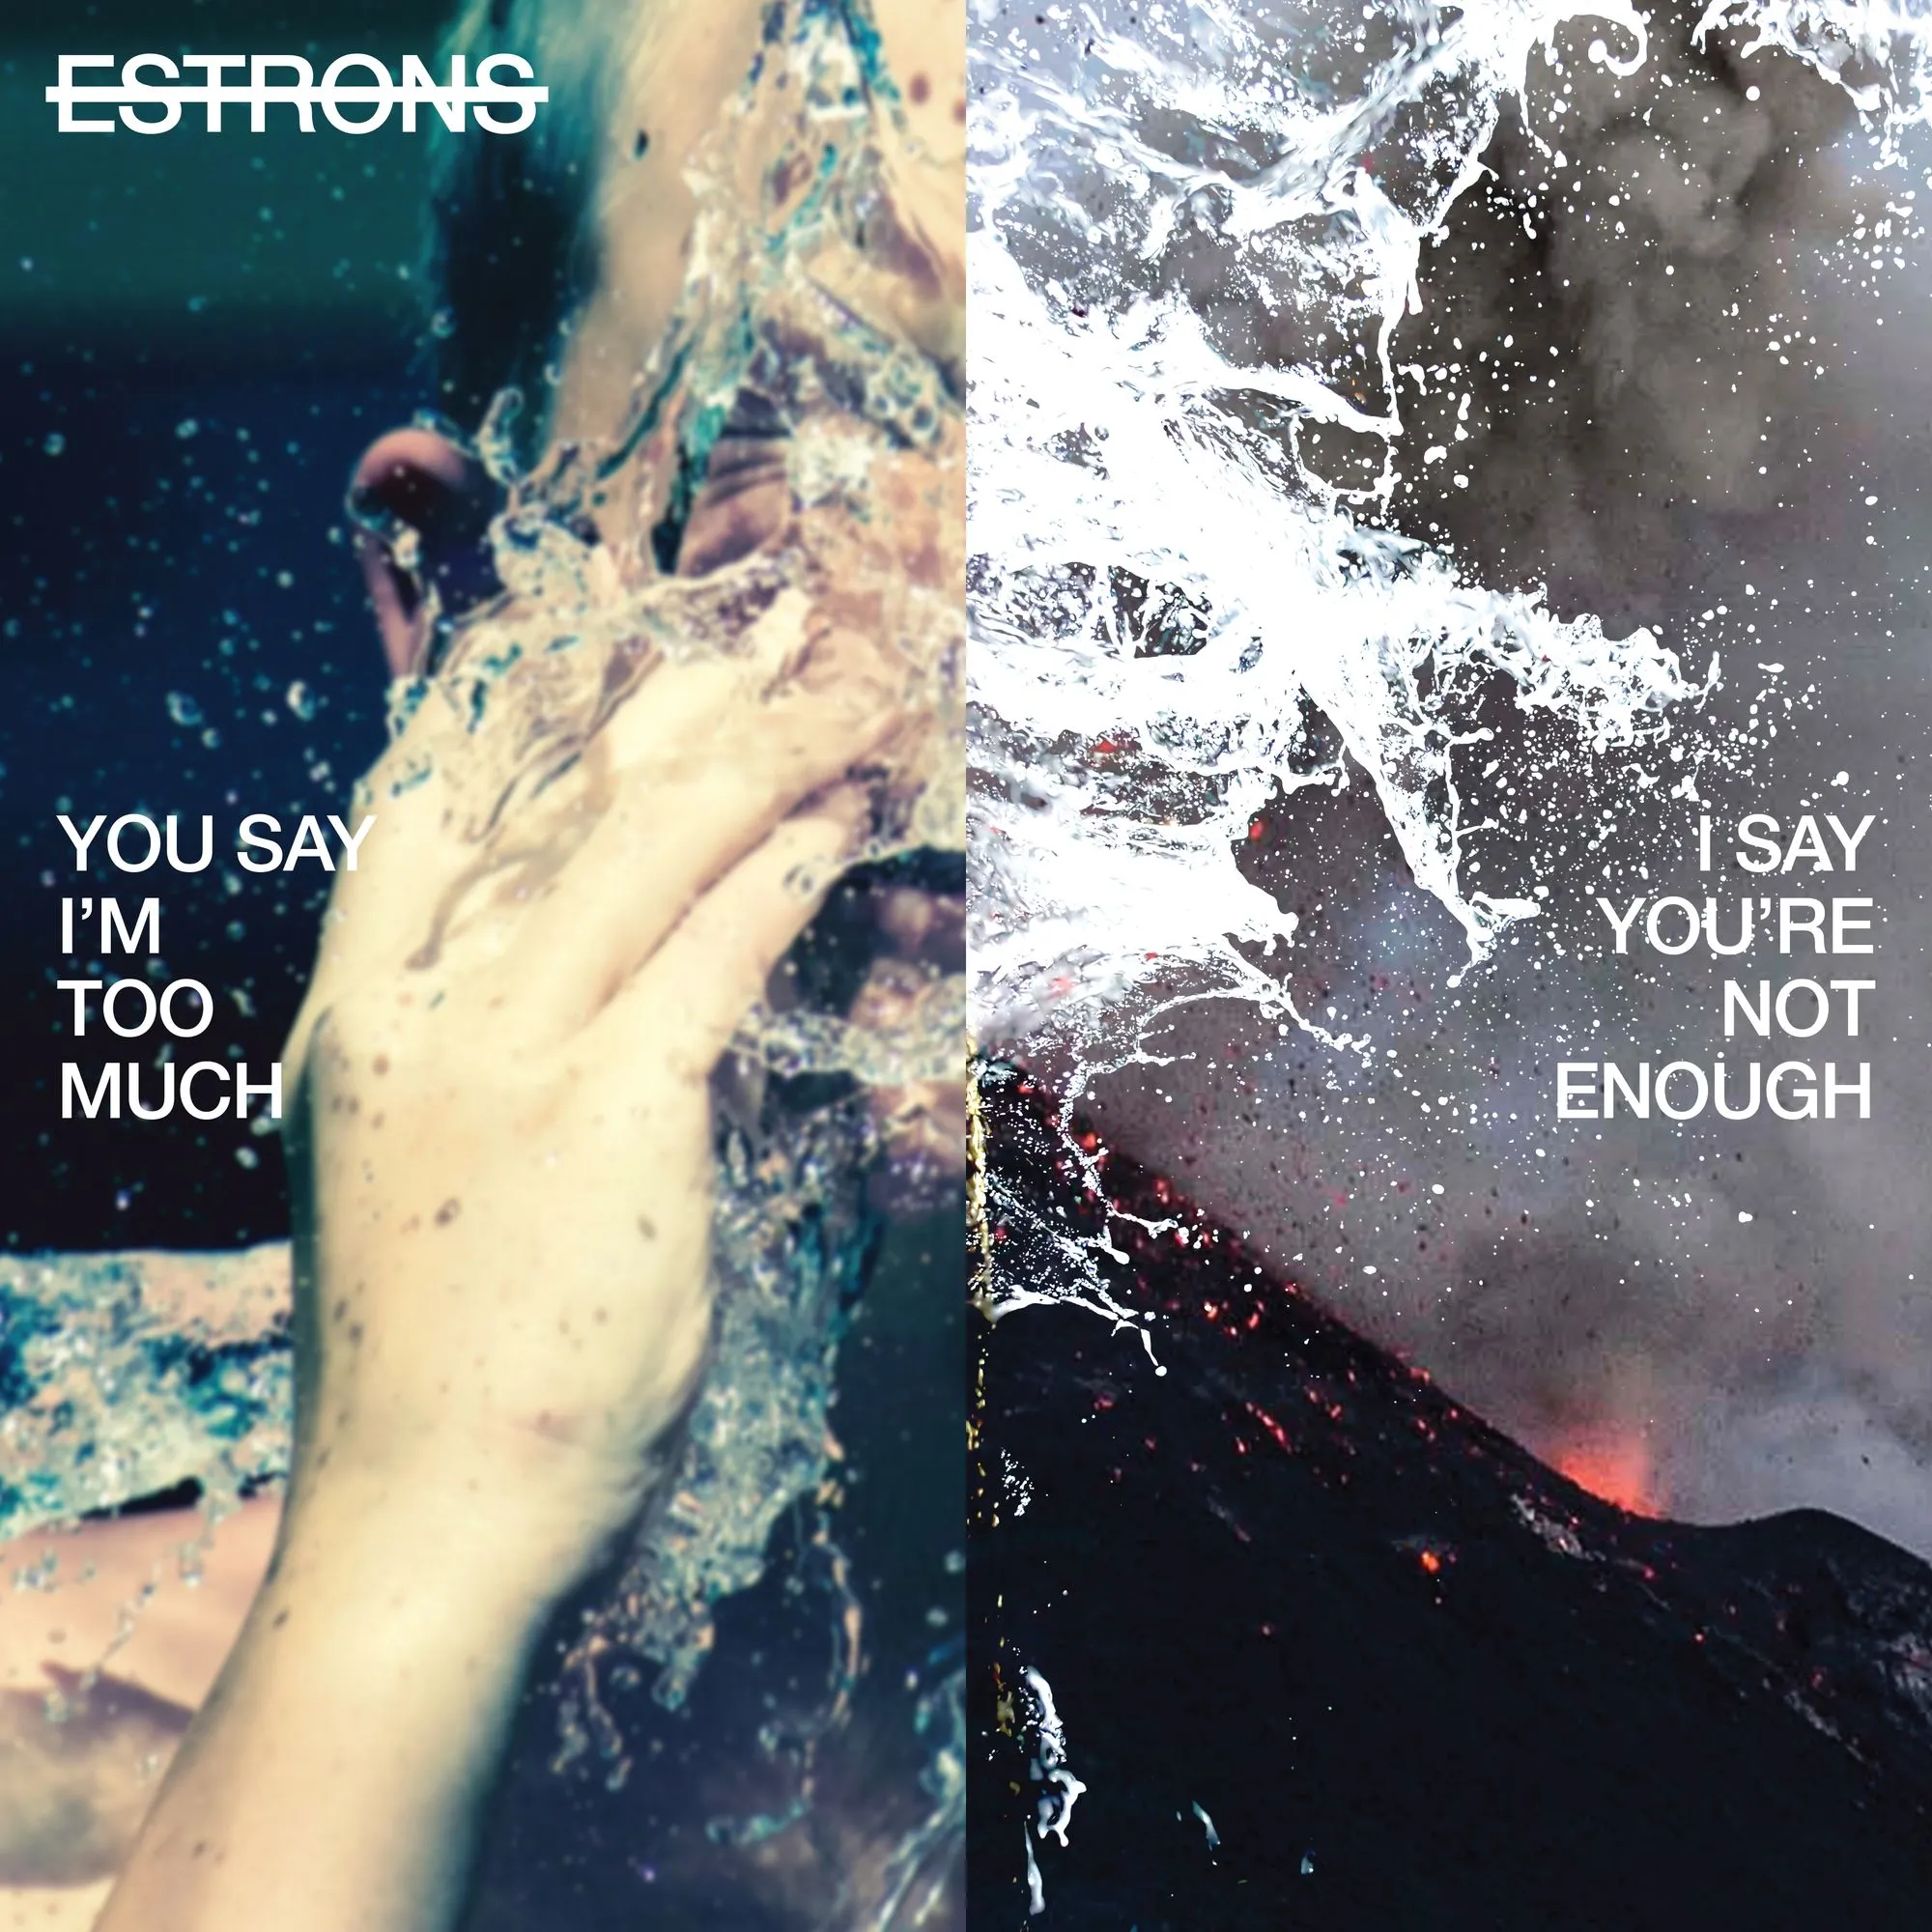 <strong>Estrons - You Say I'm Too Much, I Say You're Not Enough</strong> (Vinyl LP)